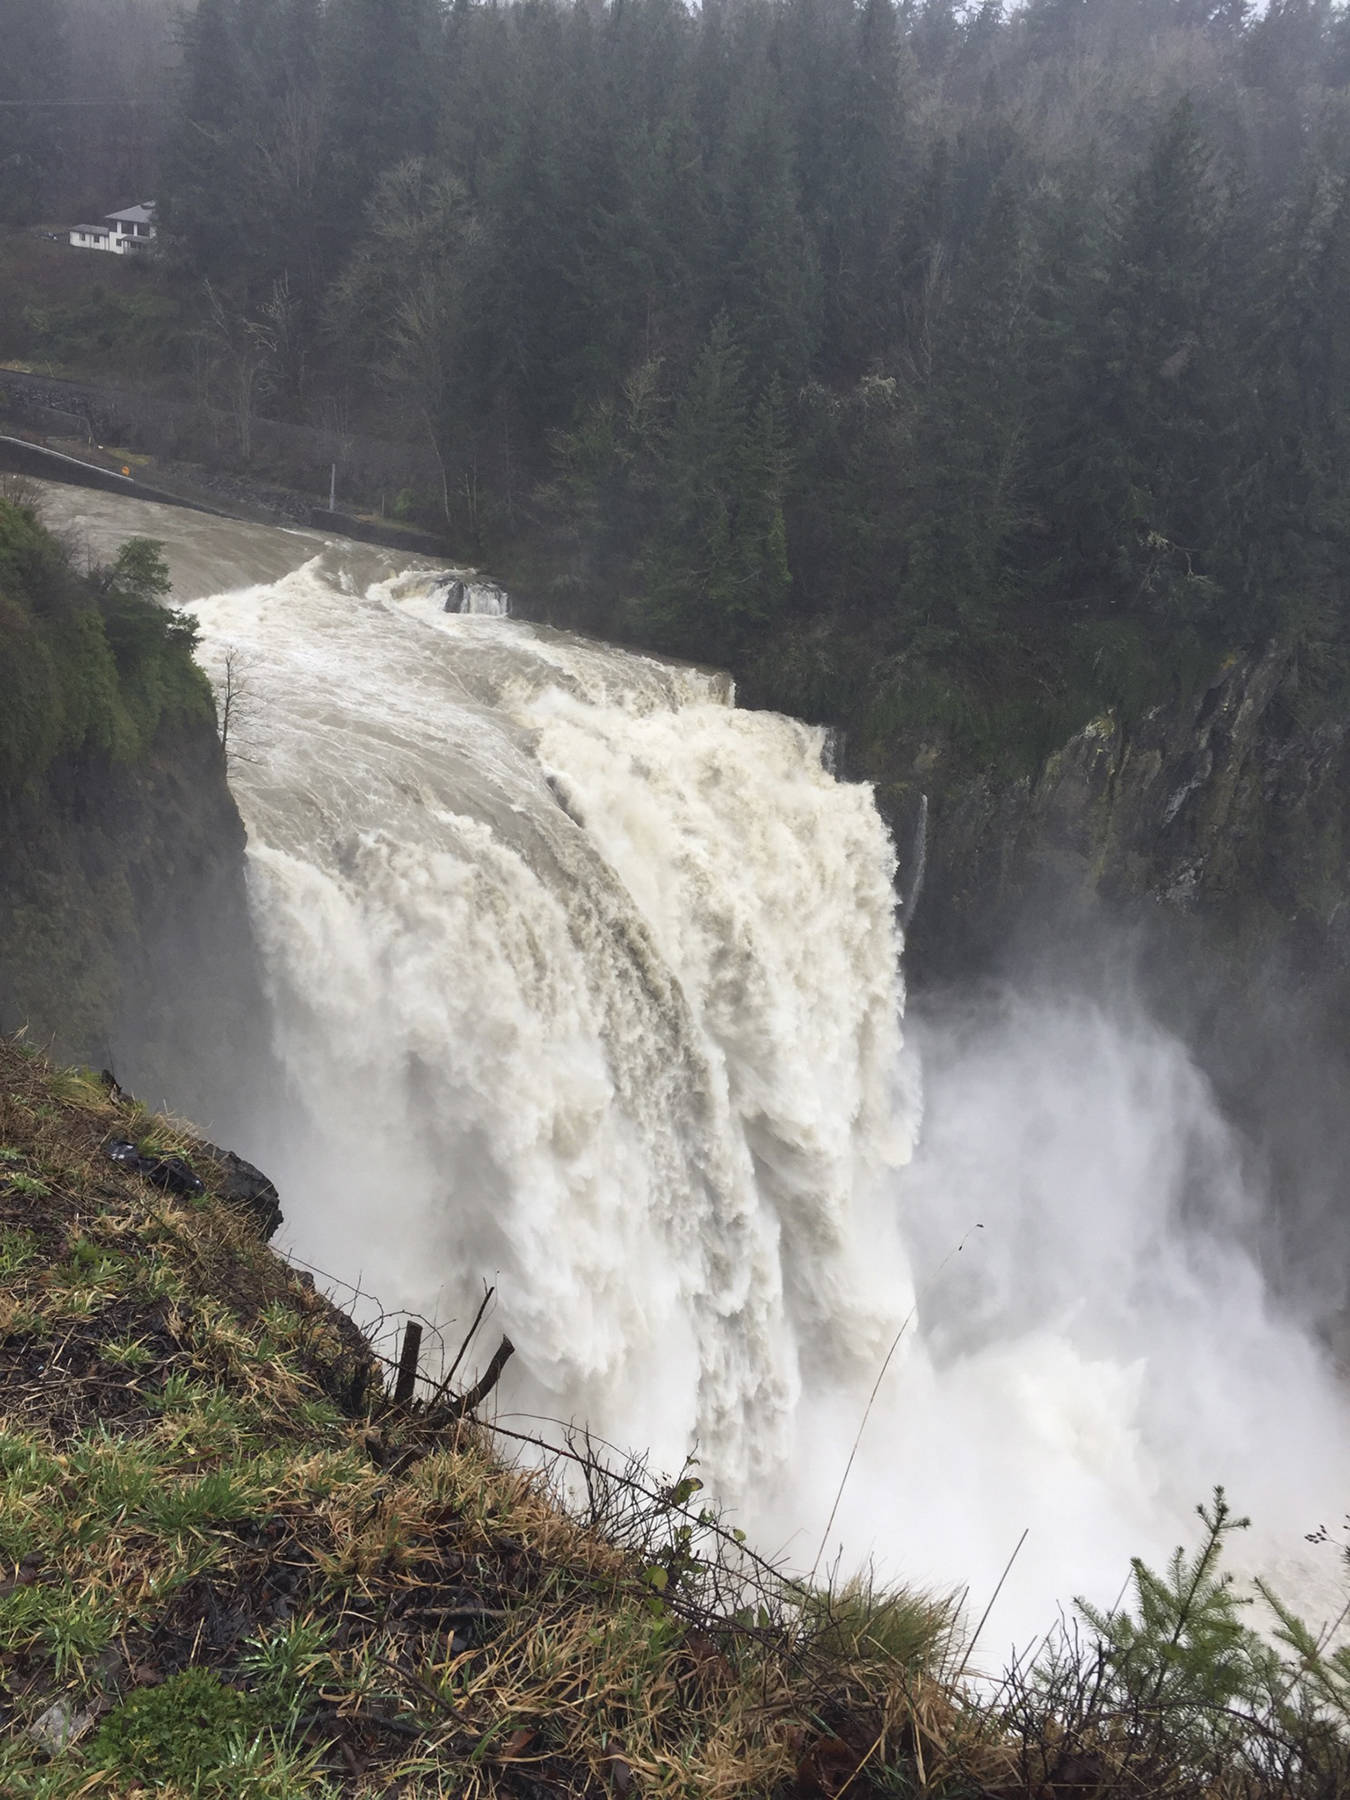 The Snoqualmie Falls is the most sacred site for the Snoqualmie Tribe, and is one of many places that attracts visitors which are within the Tribe’s ancestral lands. The Snoqualmie Tribe recently launched a campaign asking visitors to enjoy these places more mindfully. William Shaw/staff photo